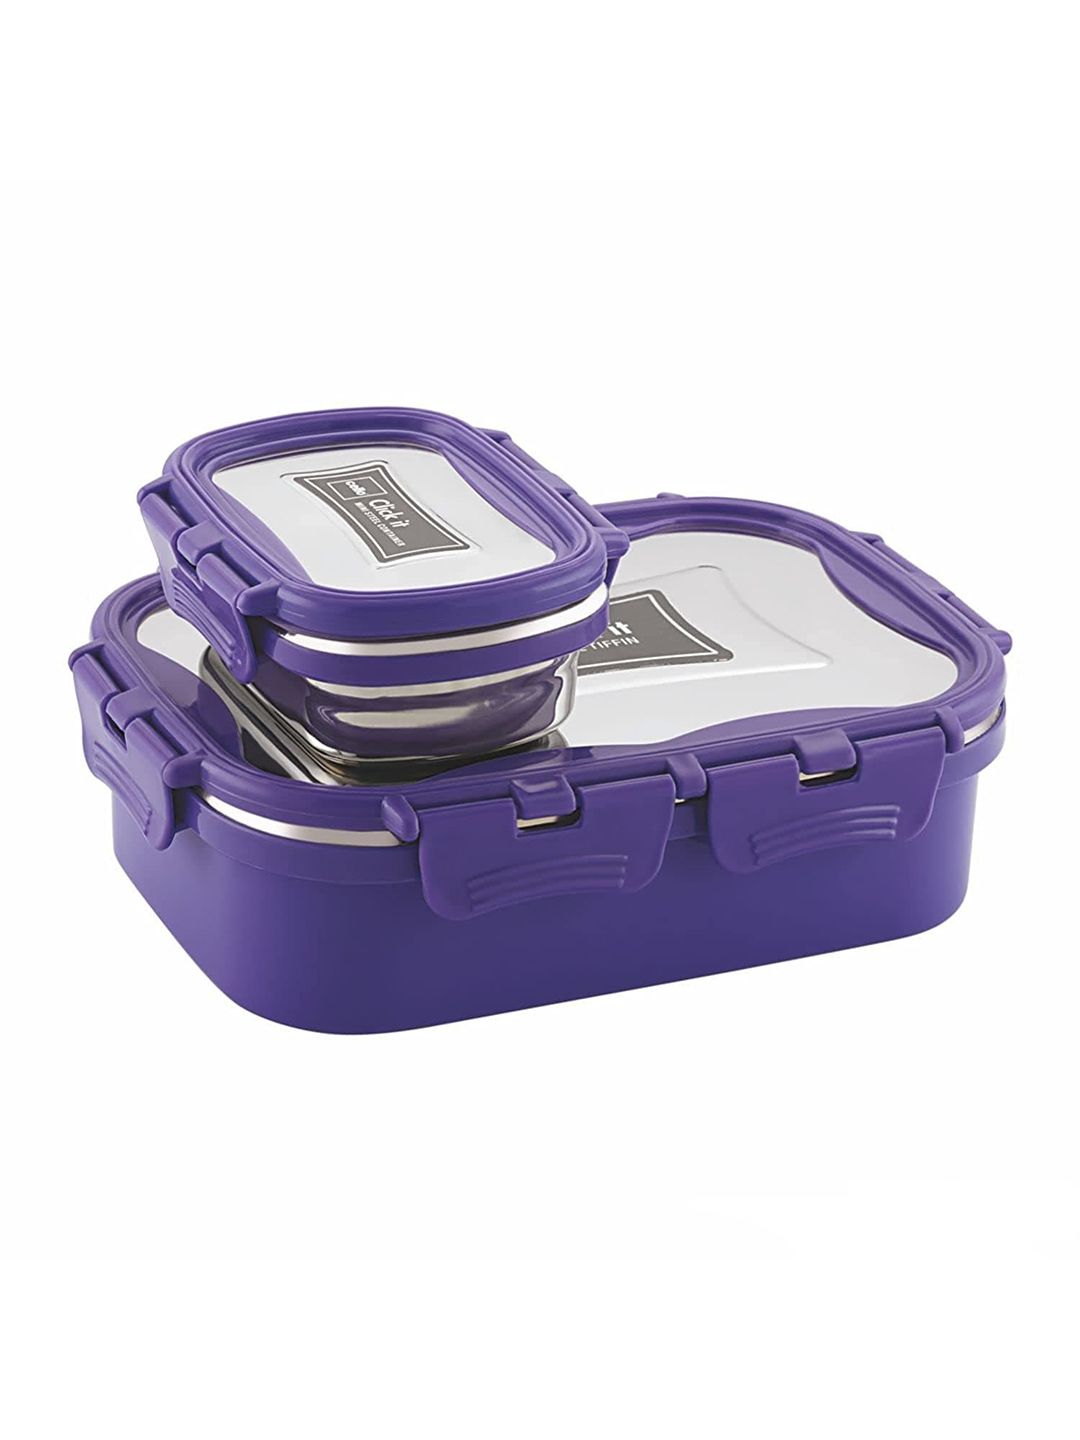 Cello Purple Thermo Stainless Steel Lunch Box Price in India